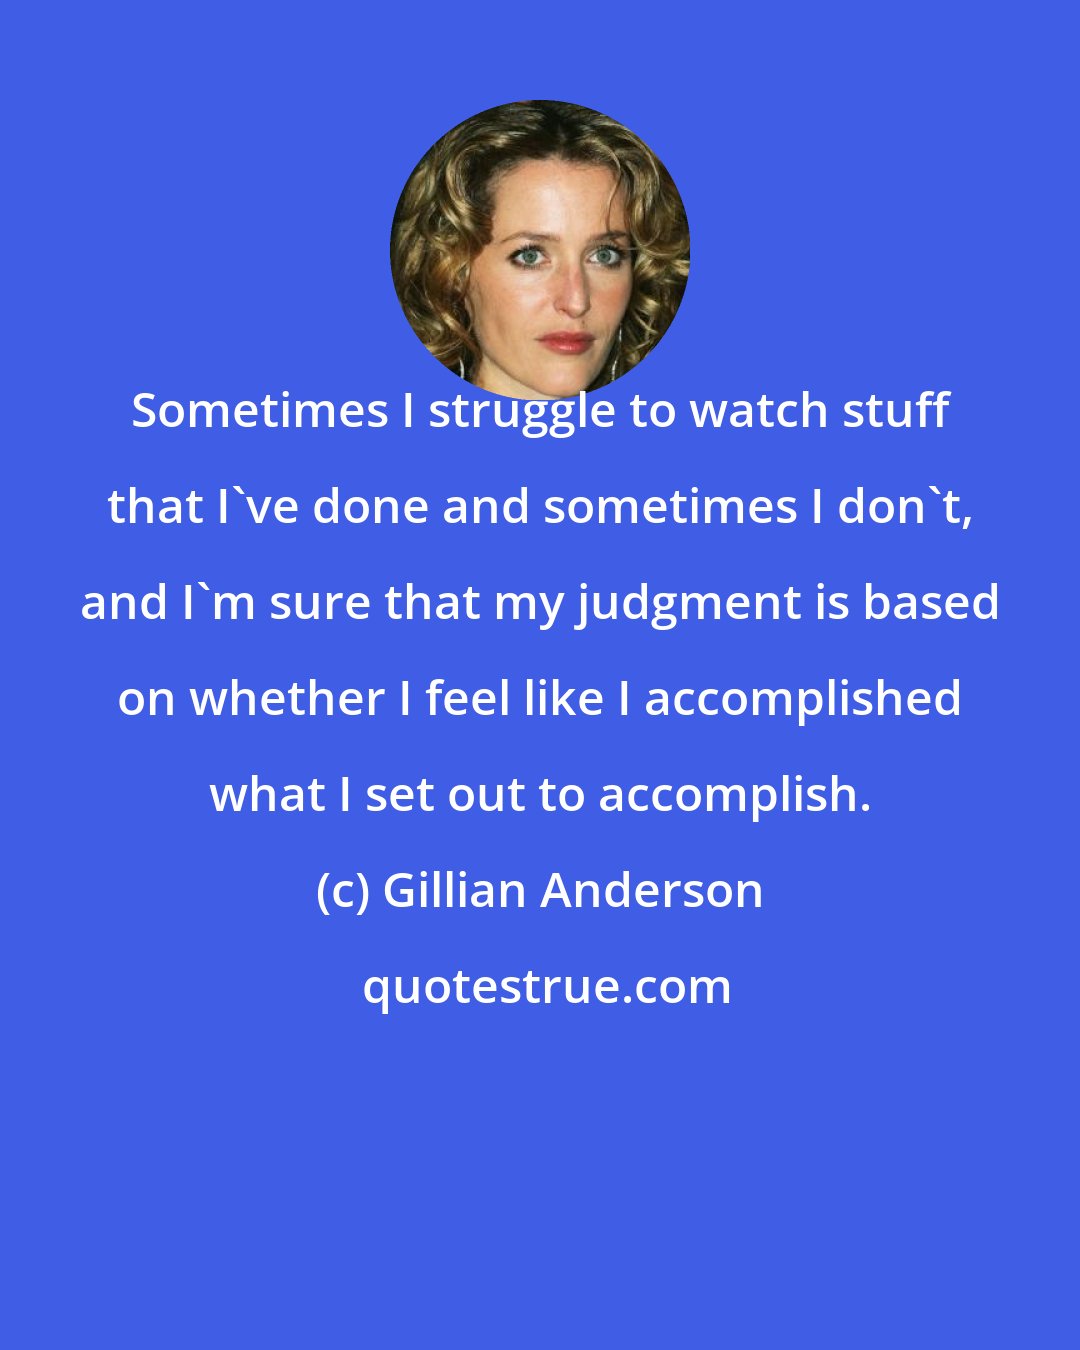 Gillian Anderson: Sometimes I struggle to watch stuff that I've done and sometimes I don't, and I'm sure that my judgment is based on whether I feel like I accomplished what I set out to accomplish.